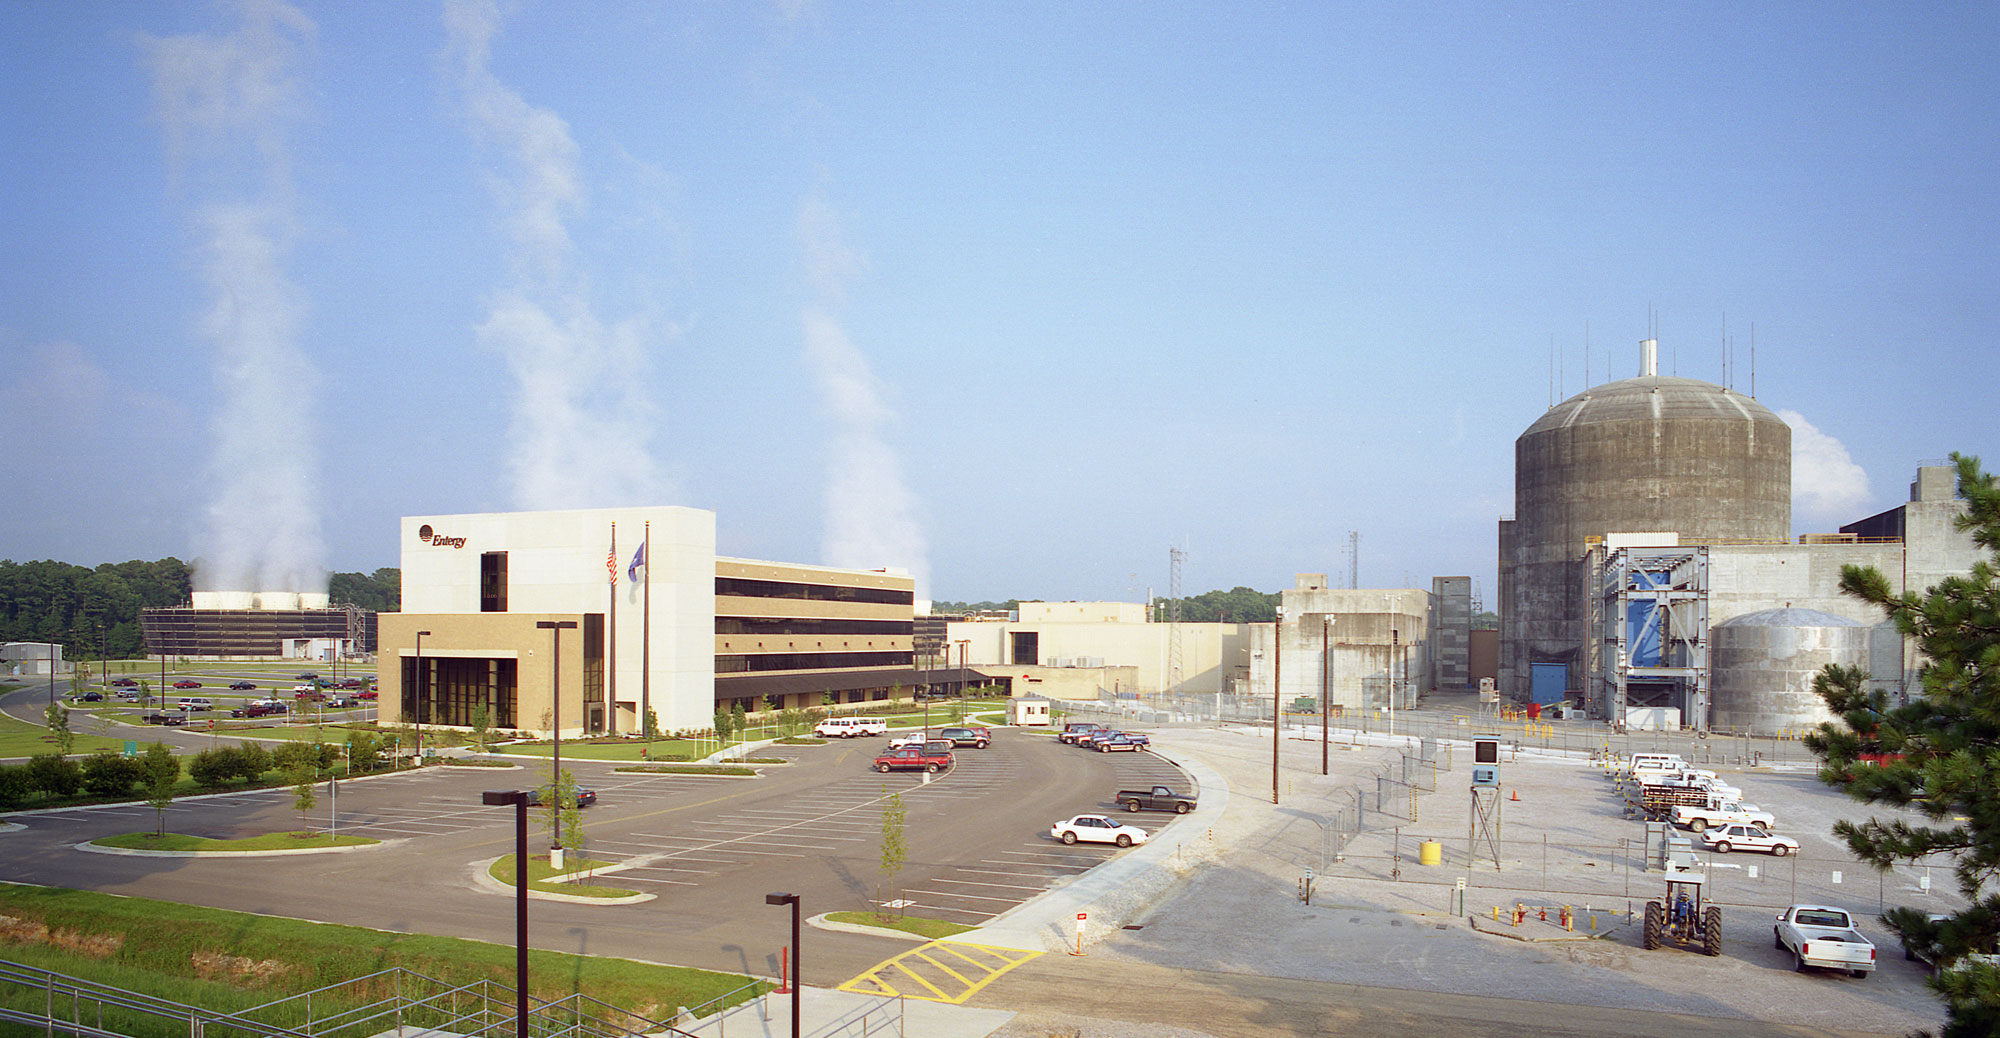 Photograph of River Bend Nuclear Station unit 1, near St. Francisville, Louisiana. An office building and structures associated with the power plant are in the photo. Smoke or steam rises in the background.